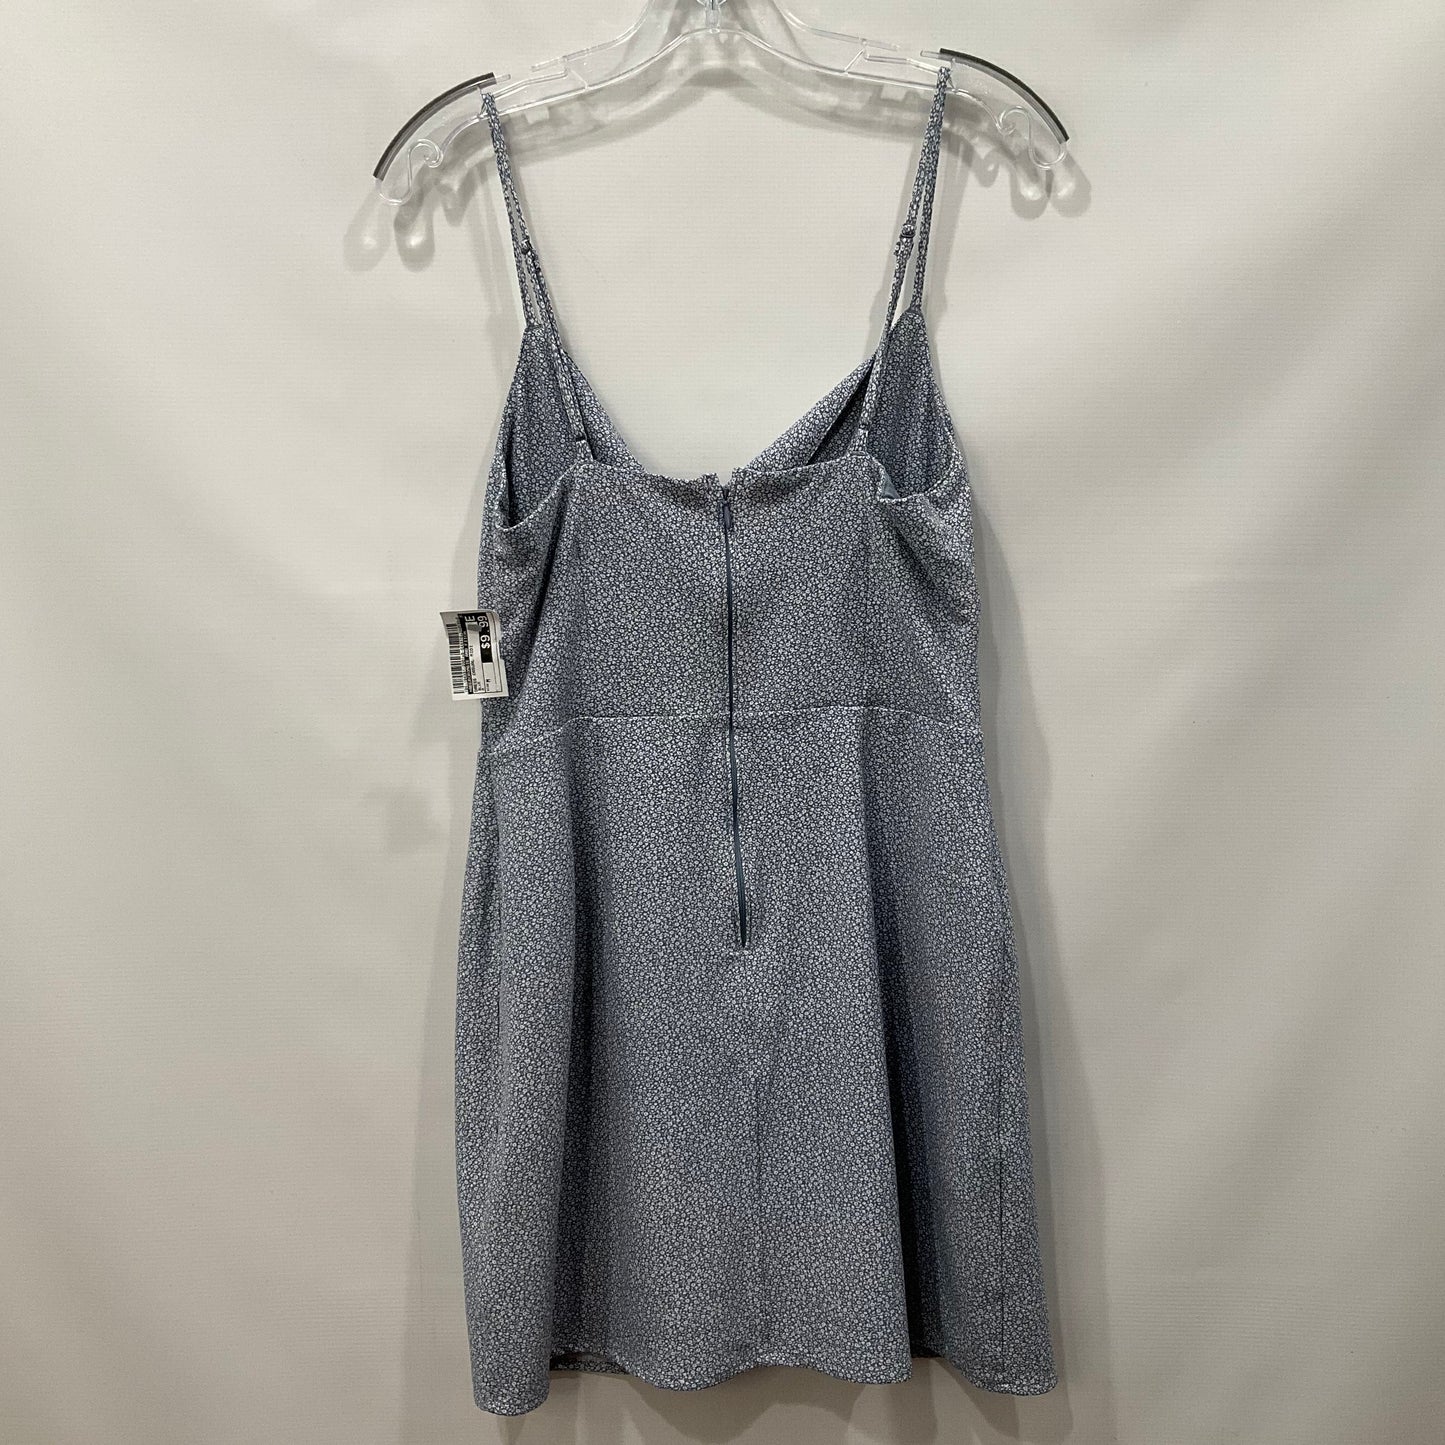 Blue Dress Casual Midi Abercrombie And Fitch, Size M